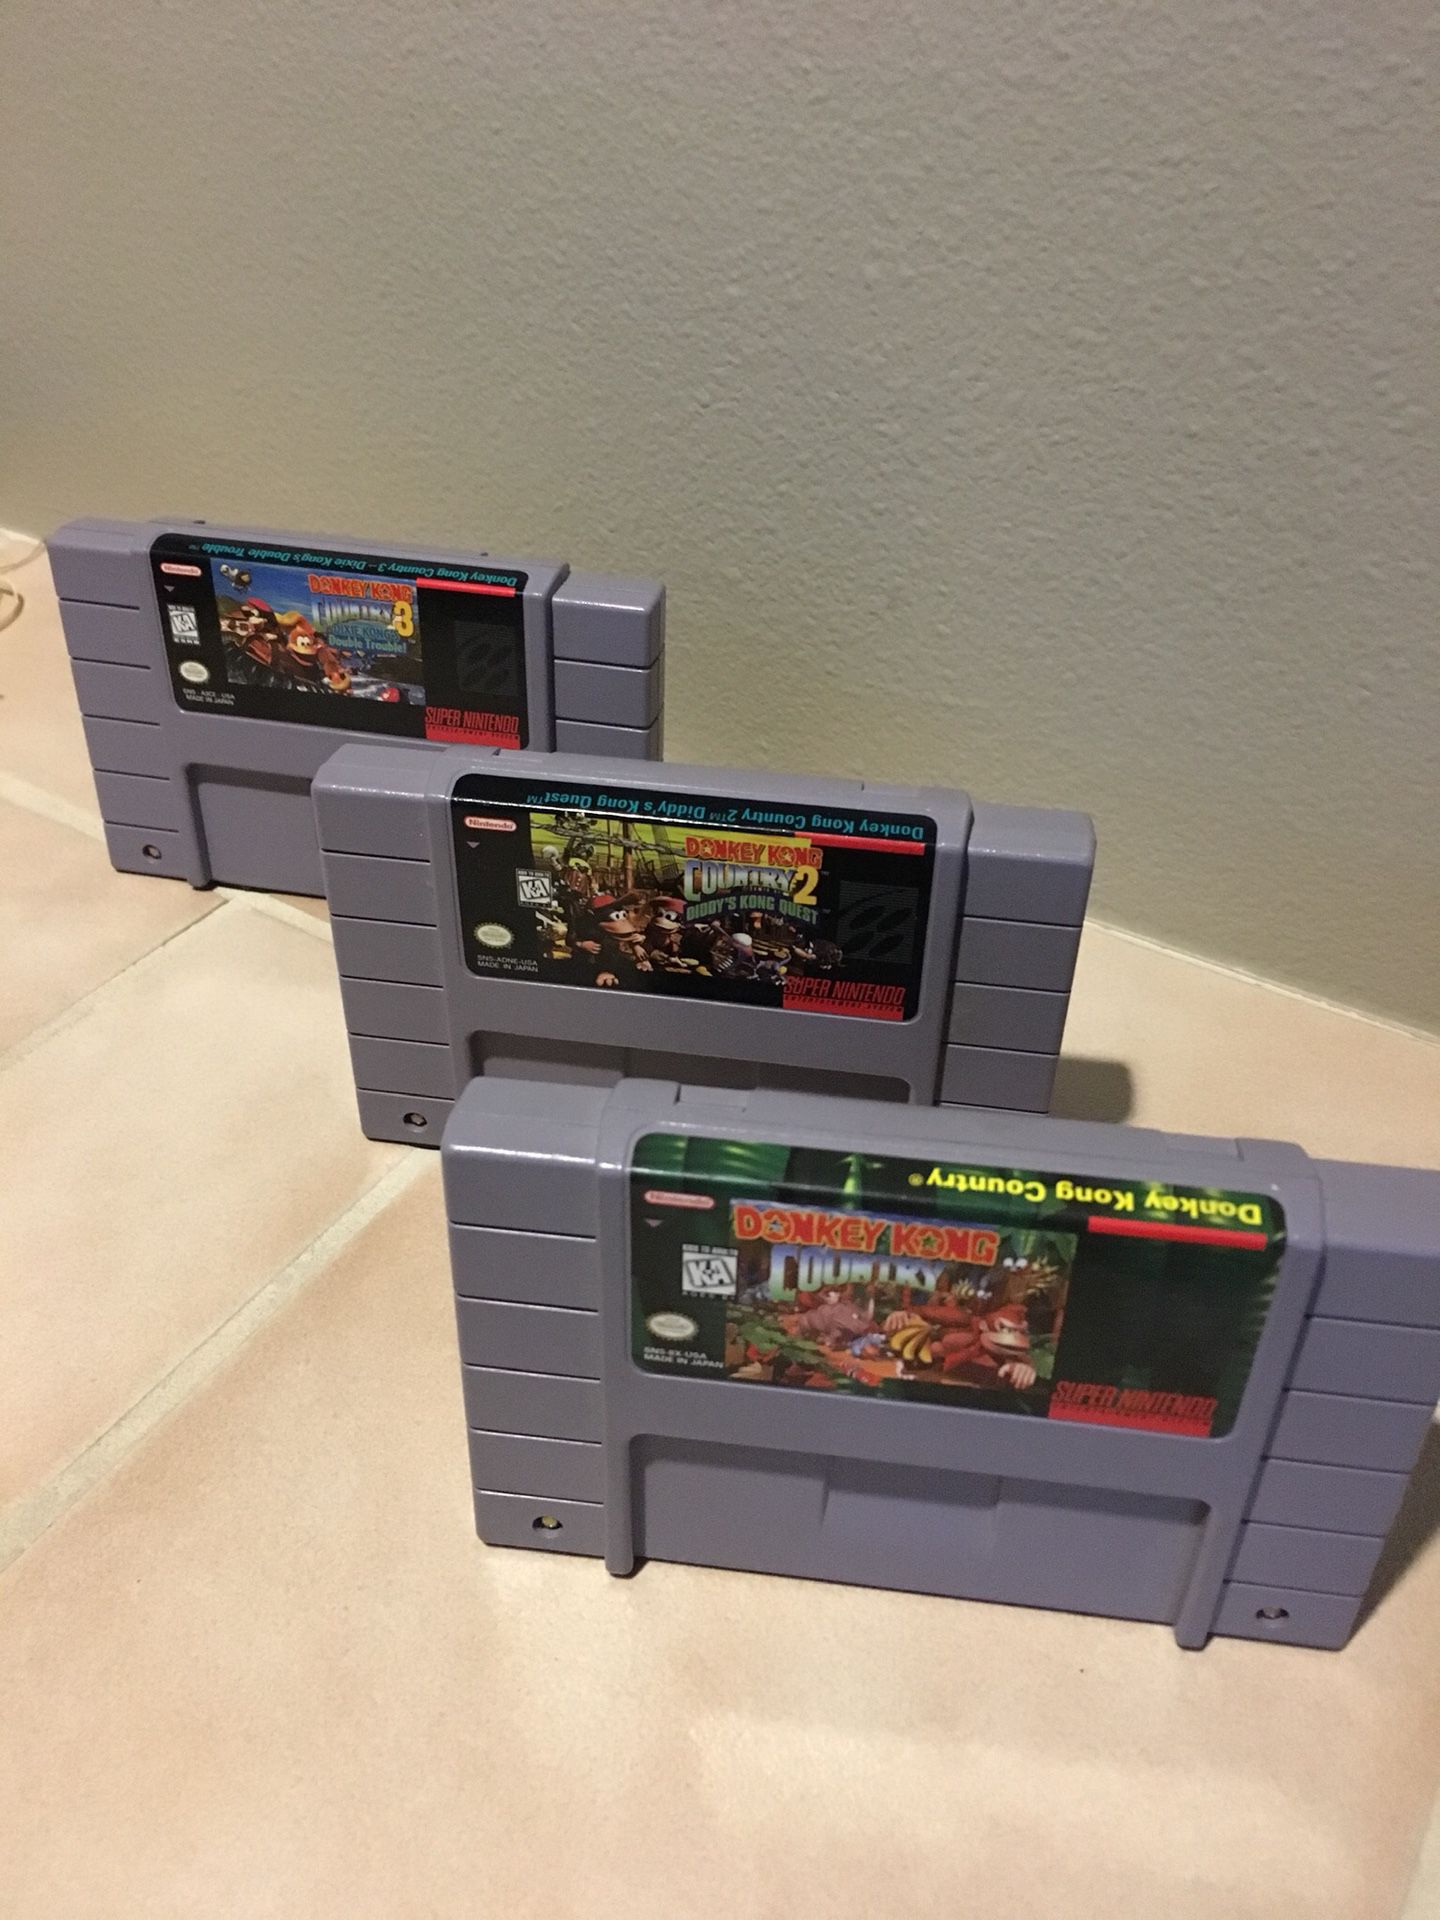 Donkey Kong country trilogy for Super Nintendo!